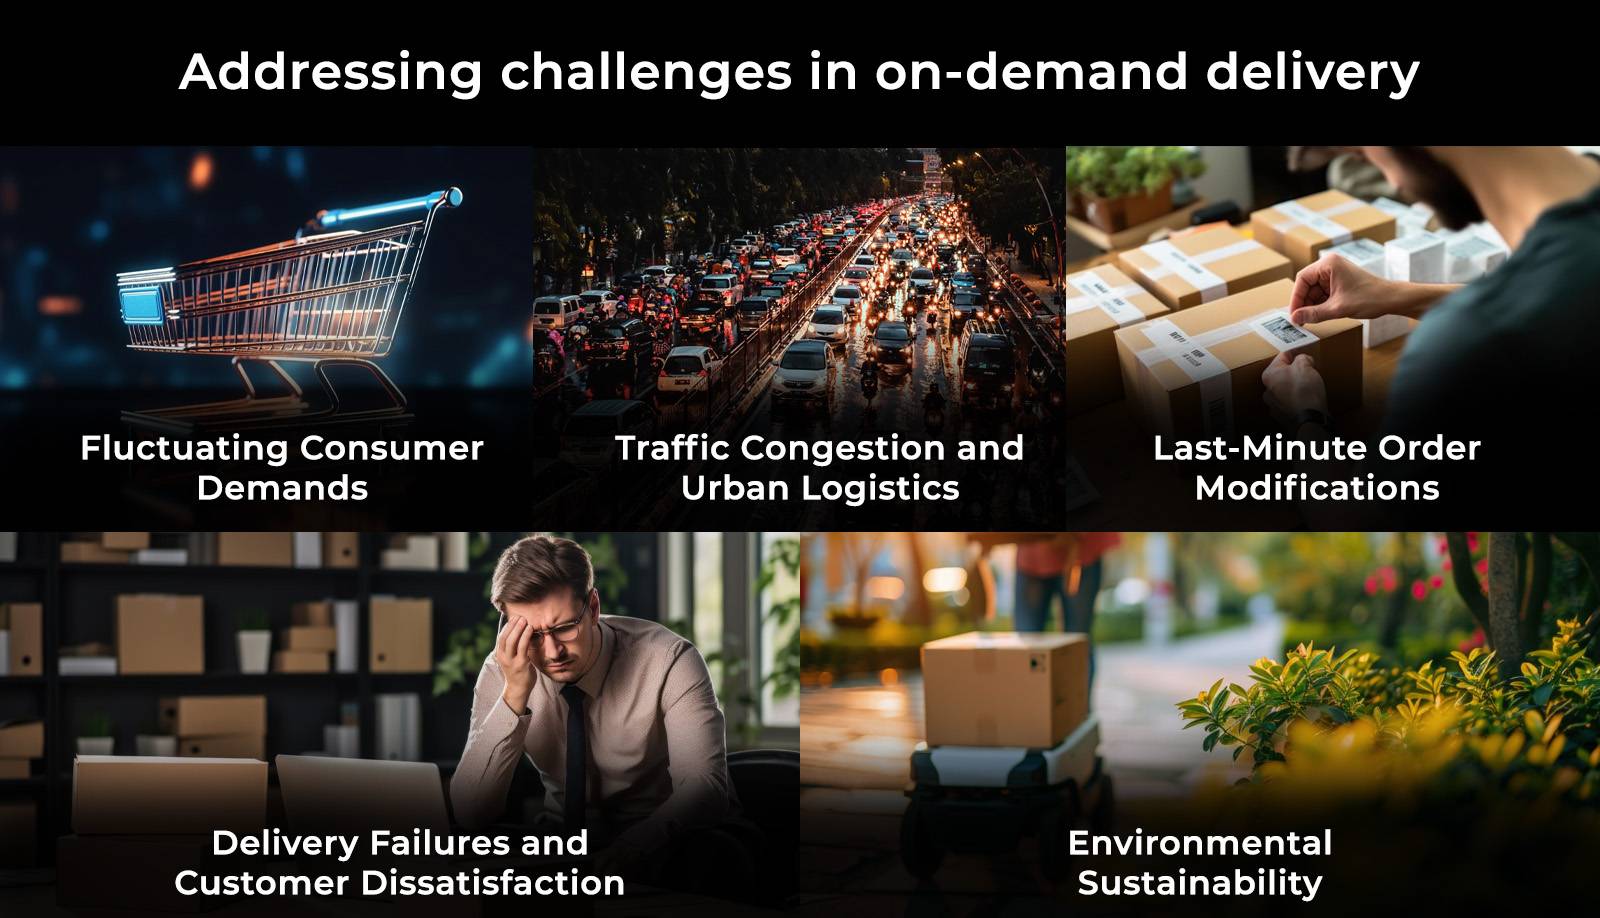 Addressing challenges in on-demand delivery logistics